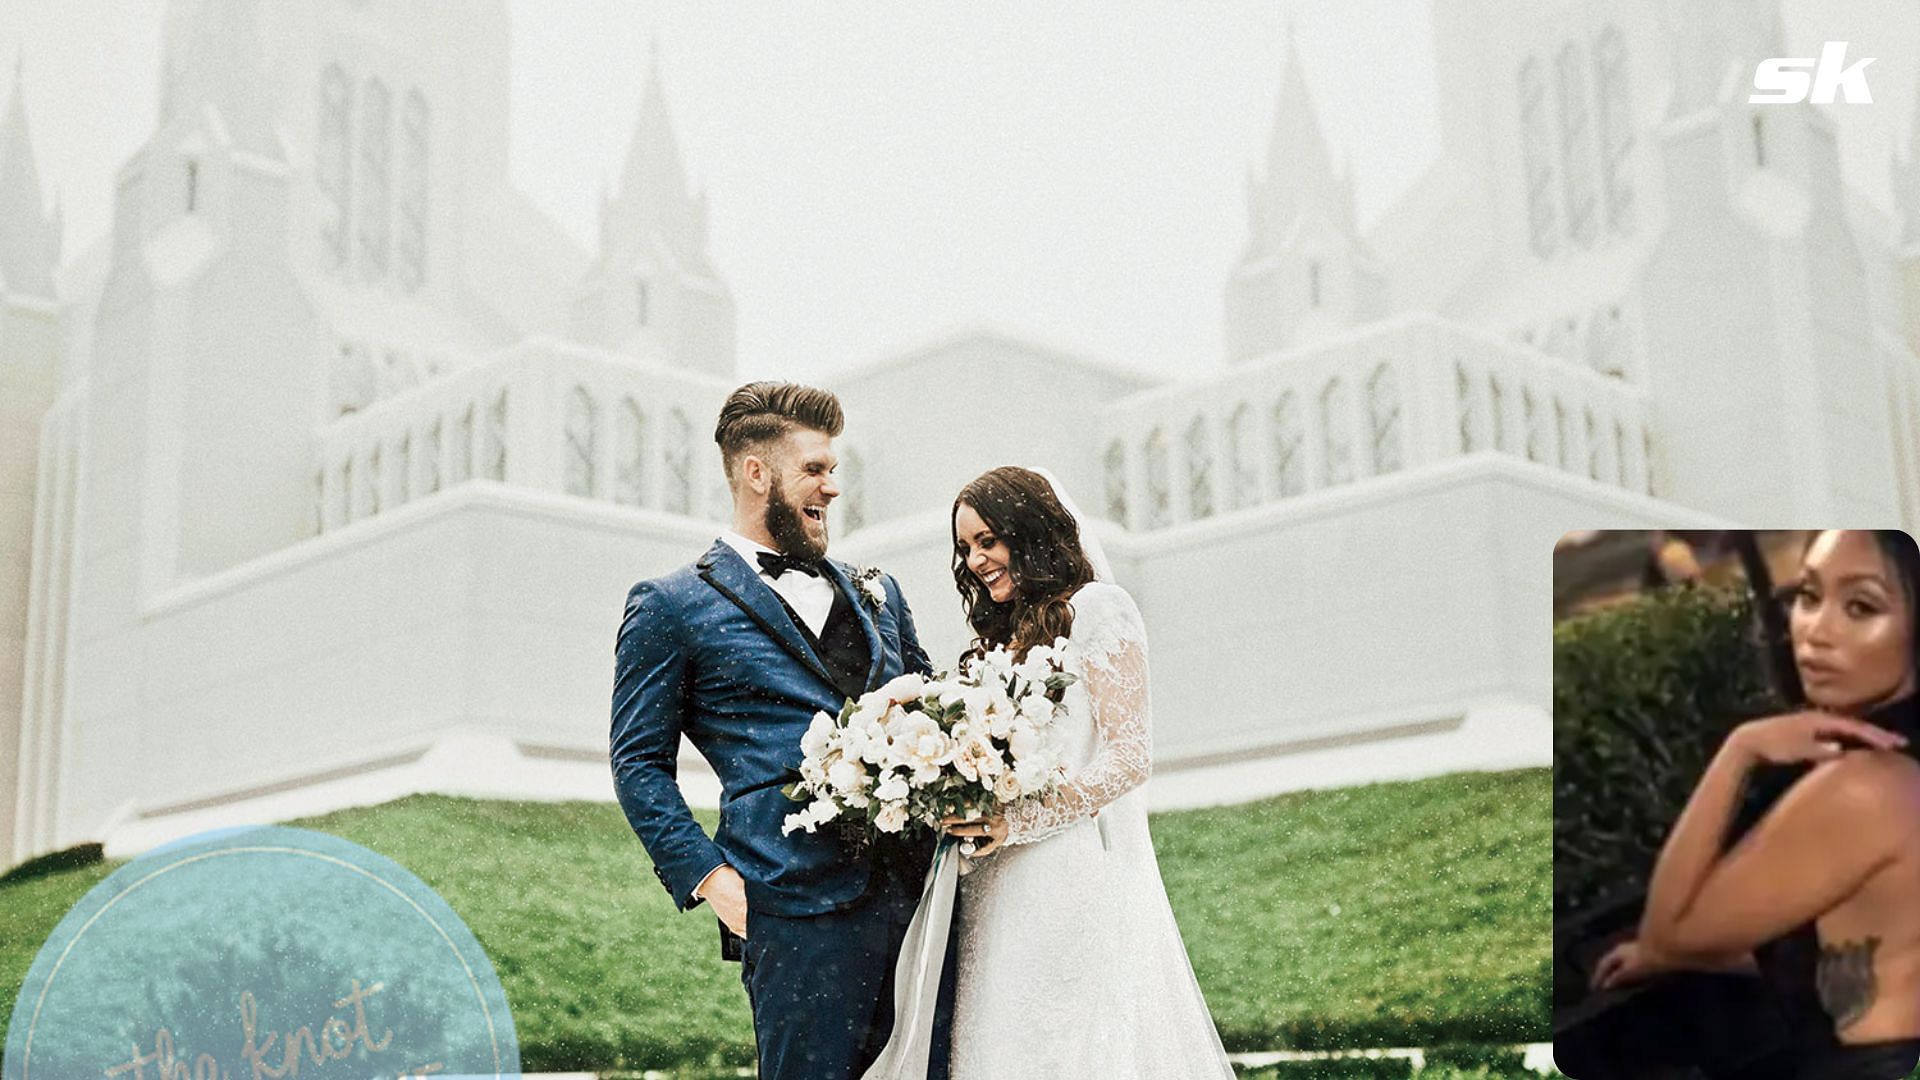 Philadelphia Phillies Bryce Harper with his wife Kayla Harper on the day of their marriage; Bryce